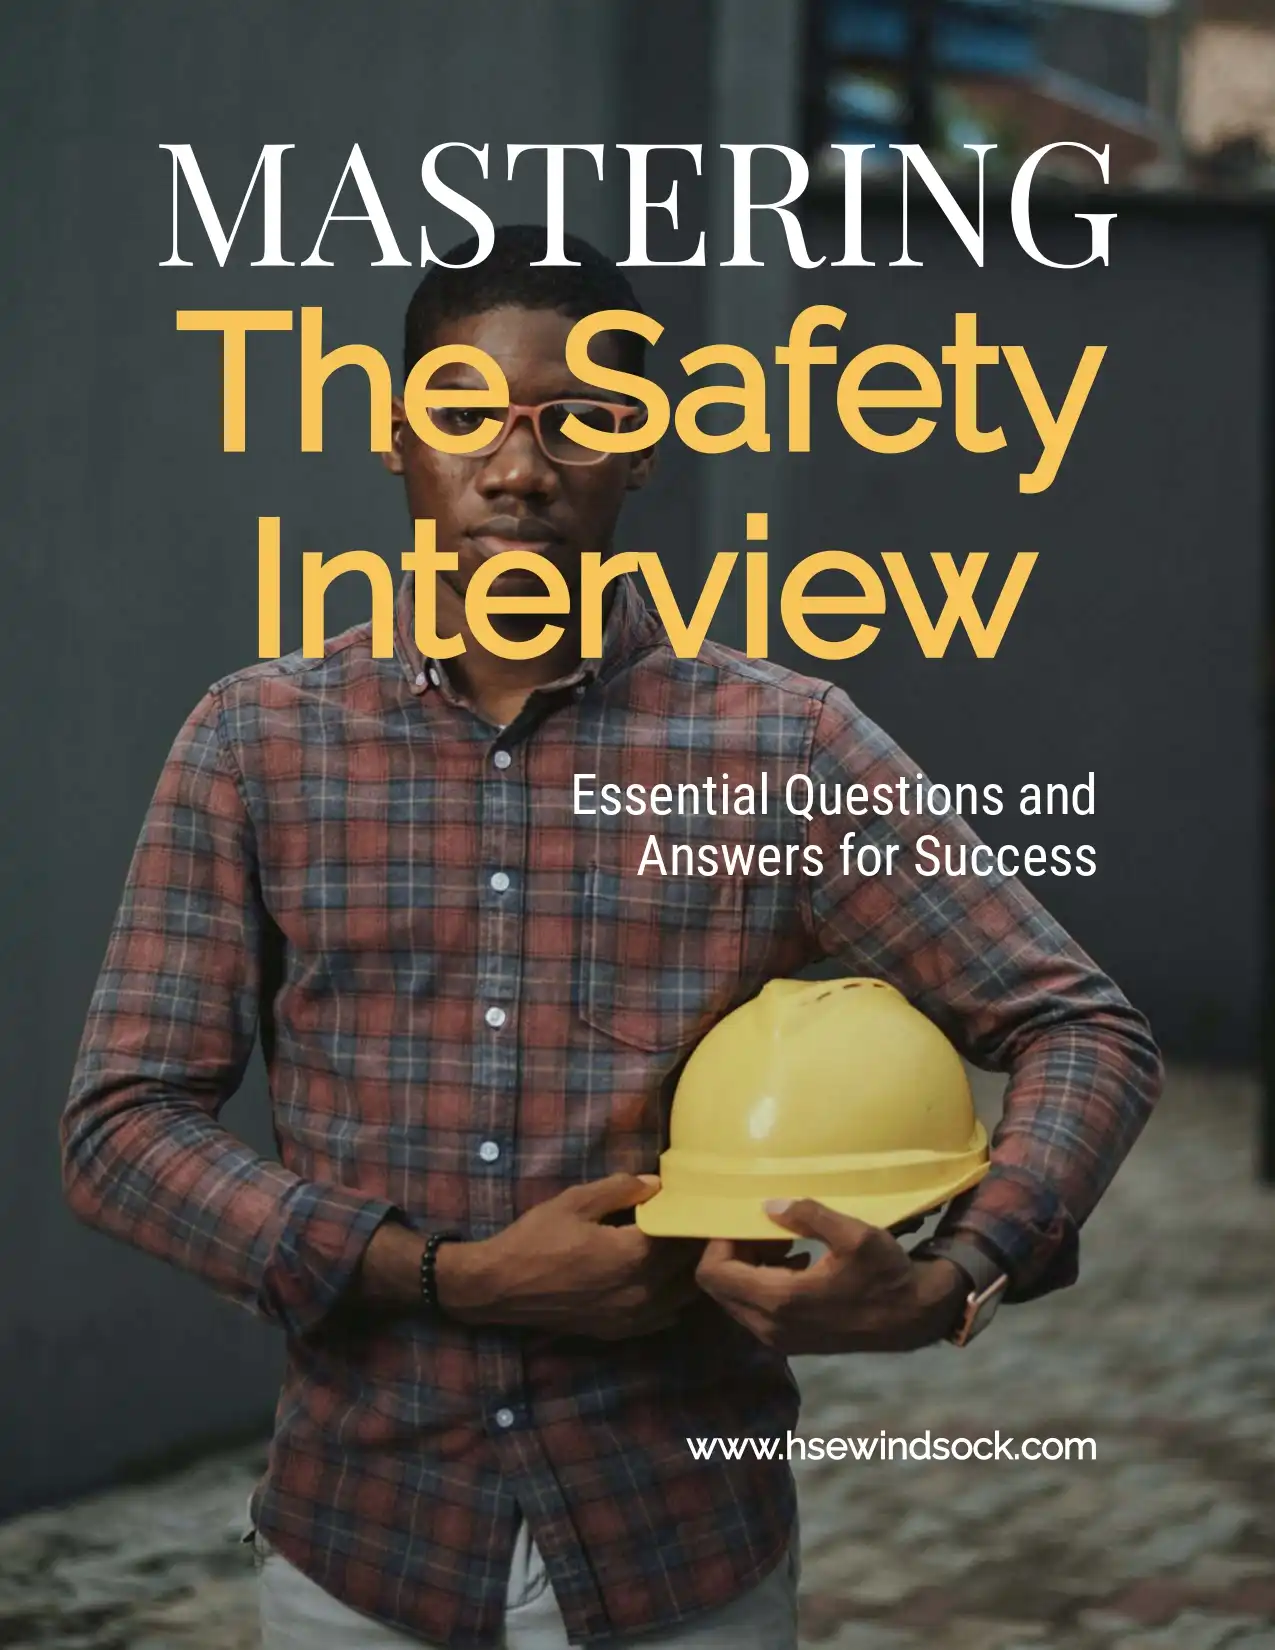 Mastering The Safety Interview Essential Questions and Answers for Success